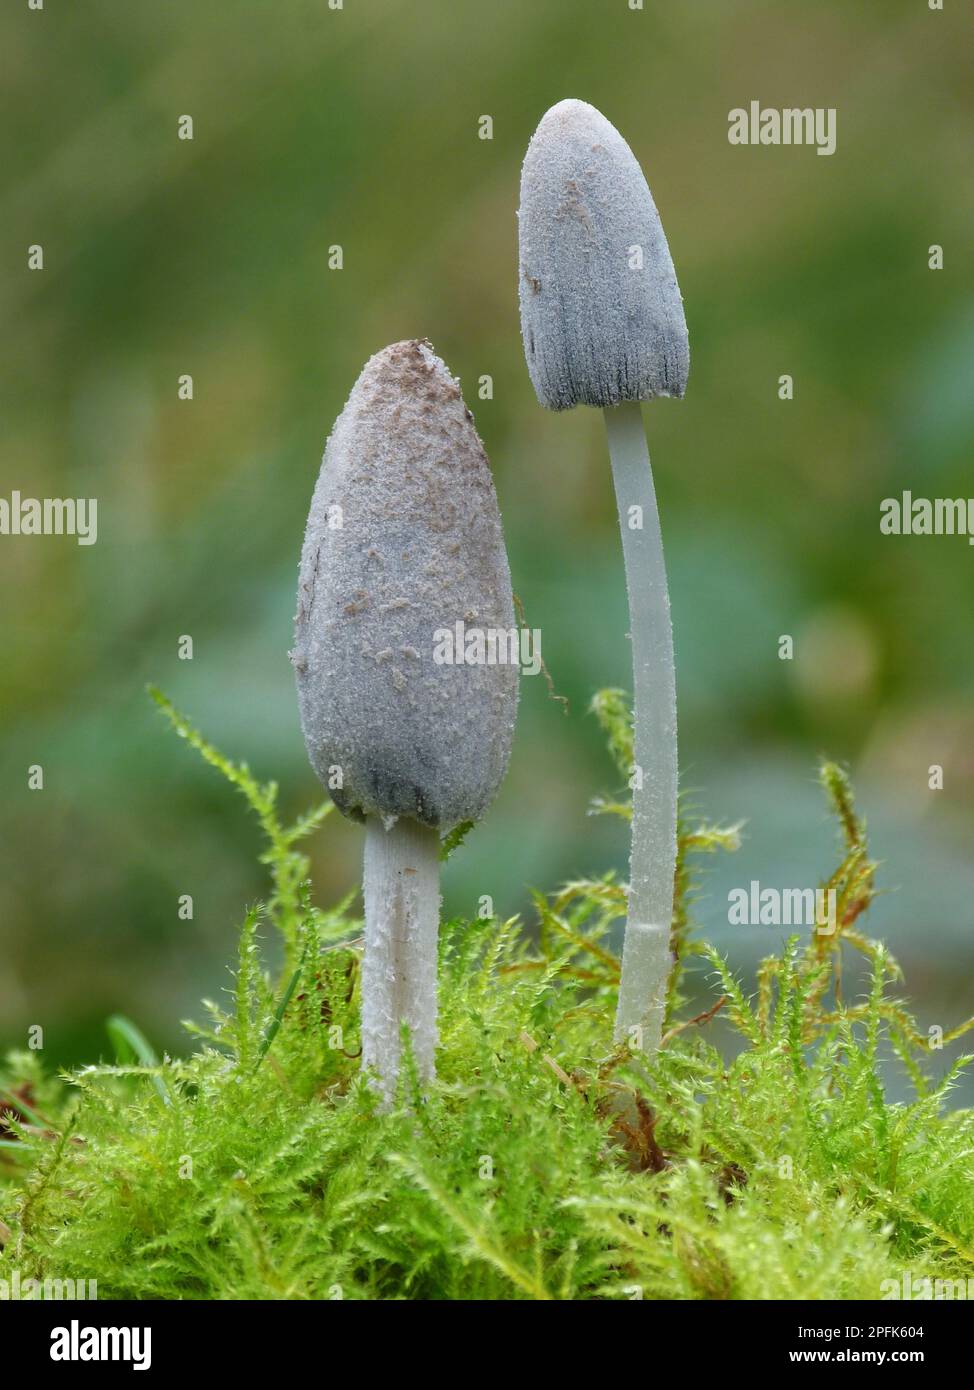 Fruiting body of common inkcap (Coprinus atramentarius), early stage, growing under moss in woodland, Leicestershire, England, United Kingdom Stock Photo